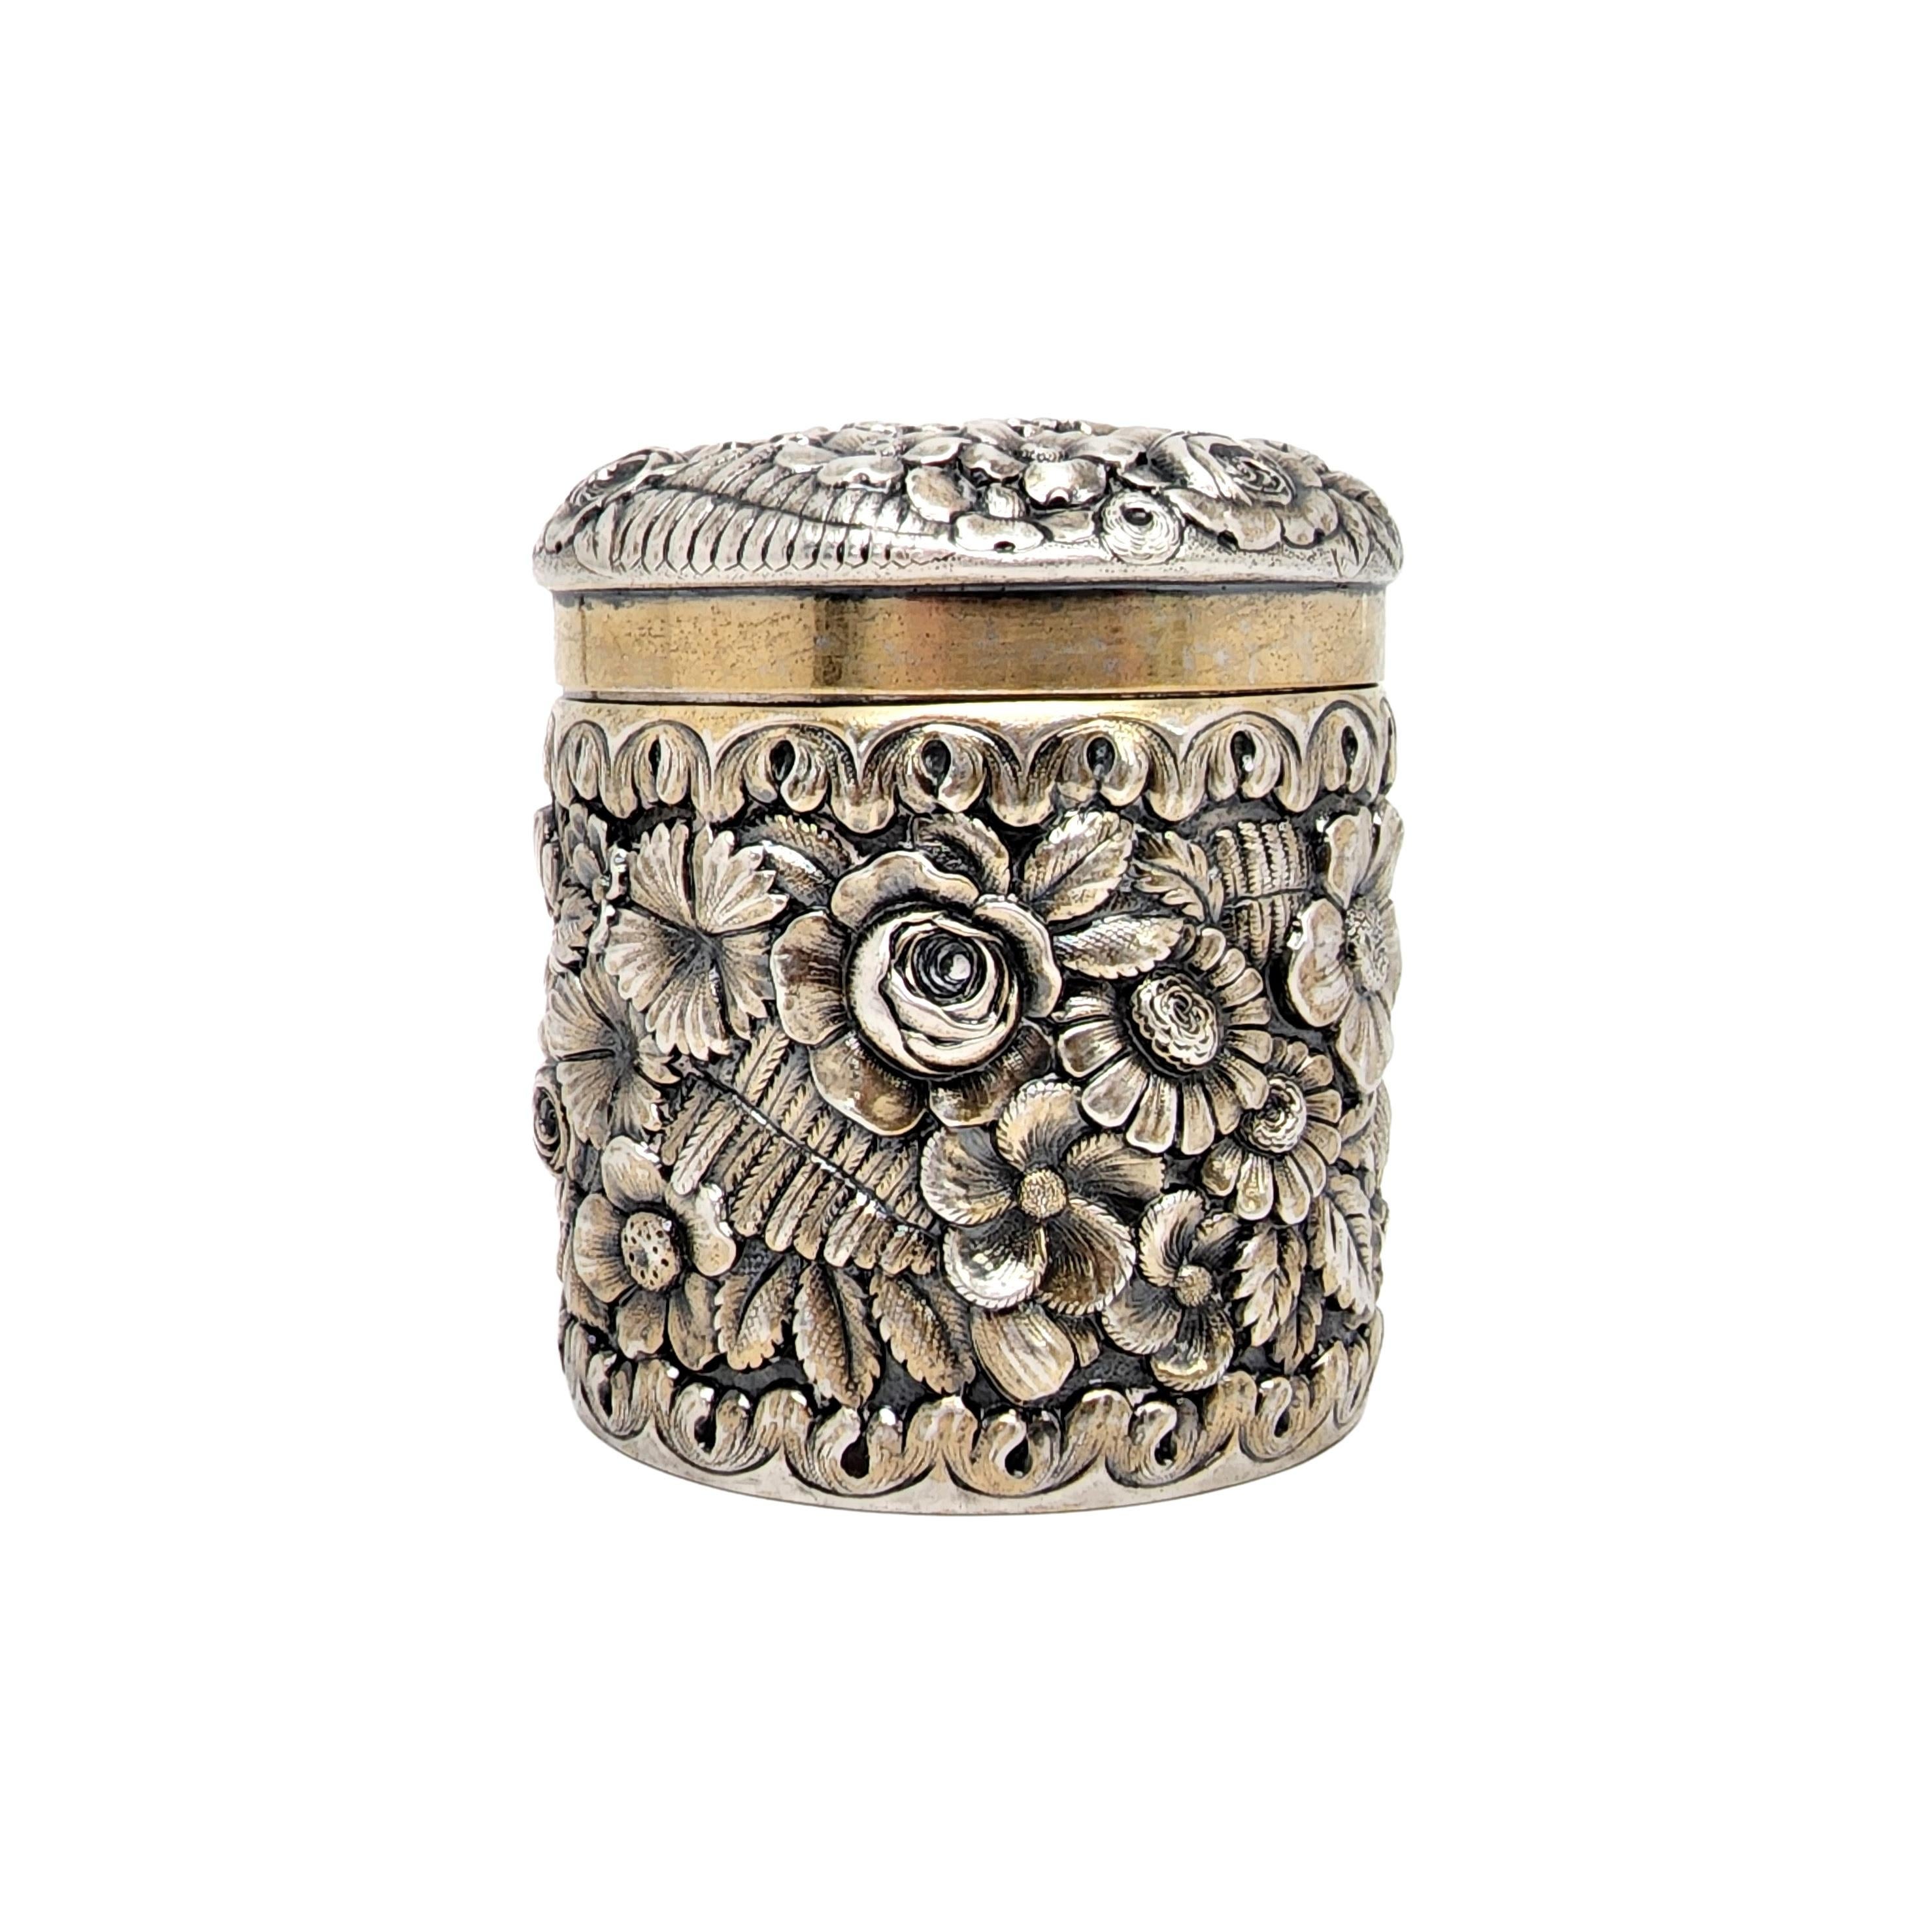 Tiffany & Co sterling silver gold wash repousse floral & fern canister box.

A beautifully ornate repousse flower and fern leaf design with gold wash accents and gold wash interior. Hallmarks date this piece to manufactured under the directorship of